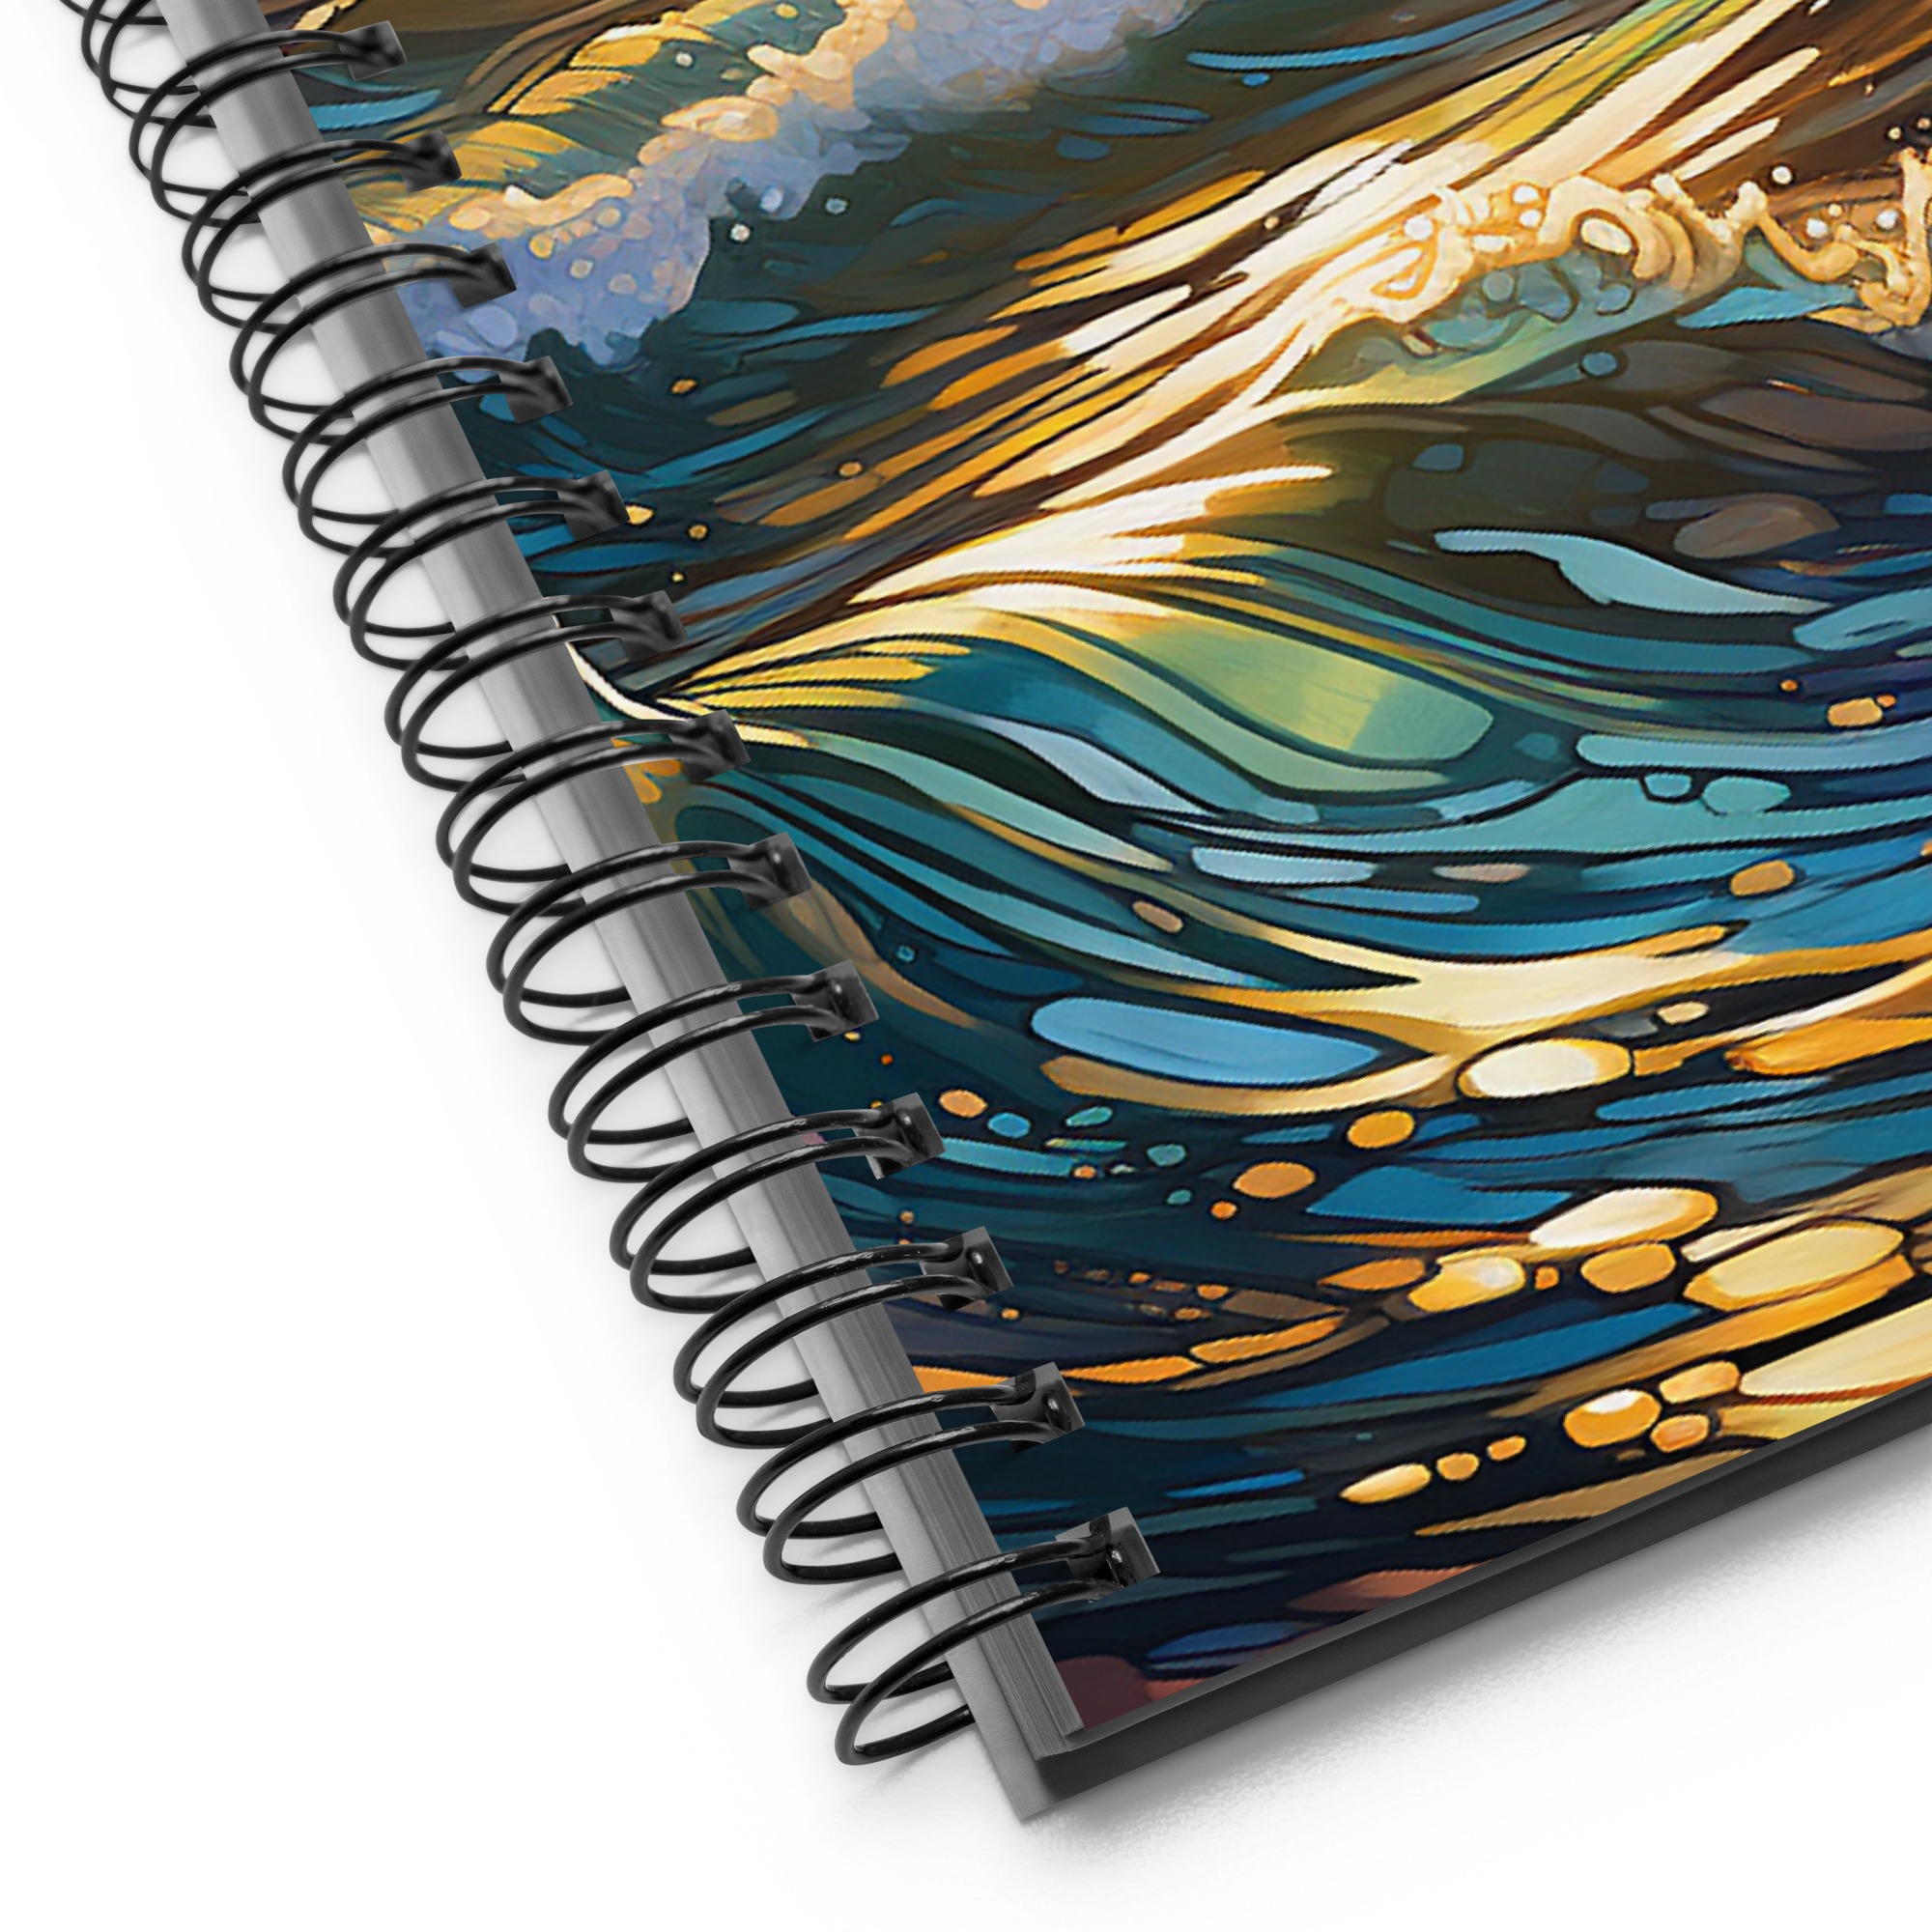 The Beach at Sunset | Stained Glass Illustrations | Spiral notebook